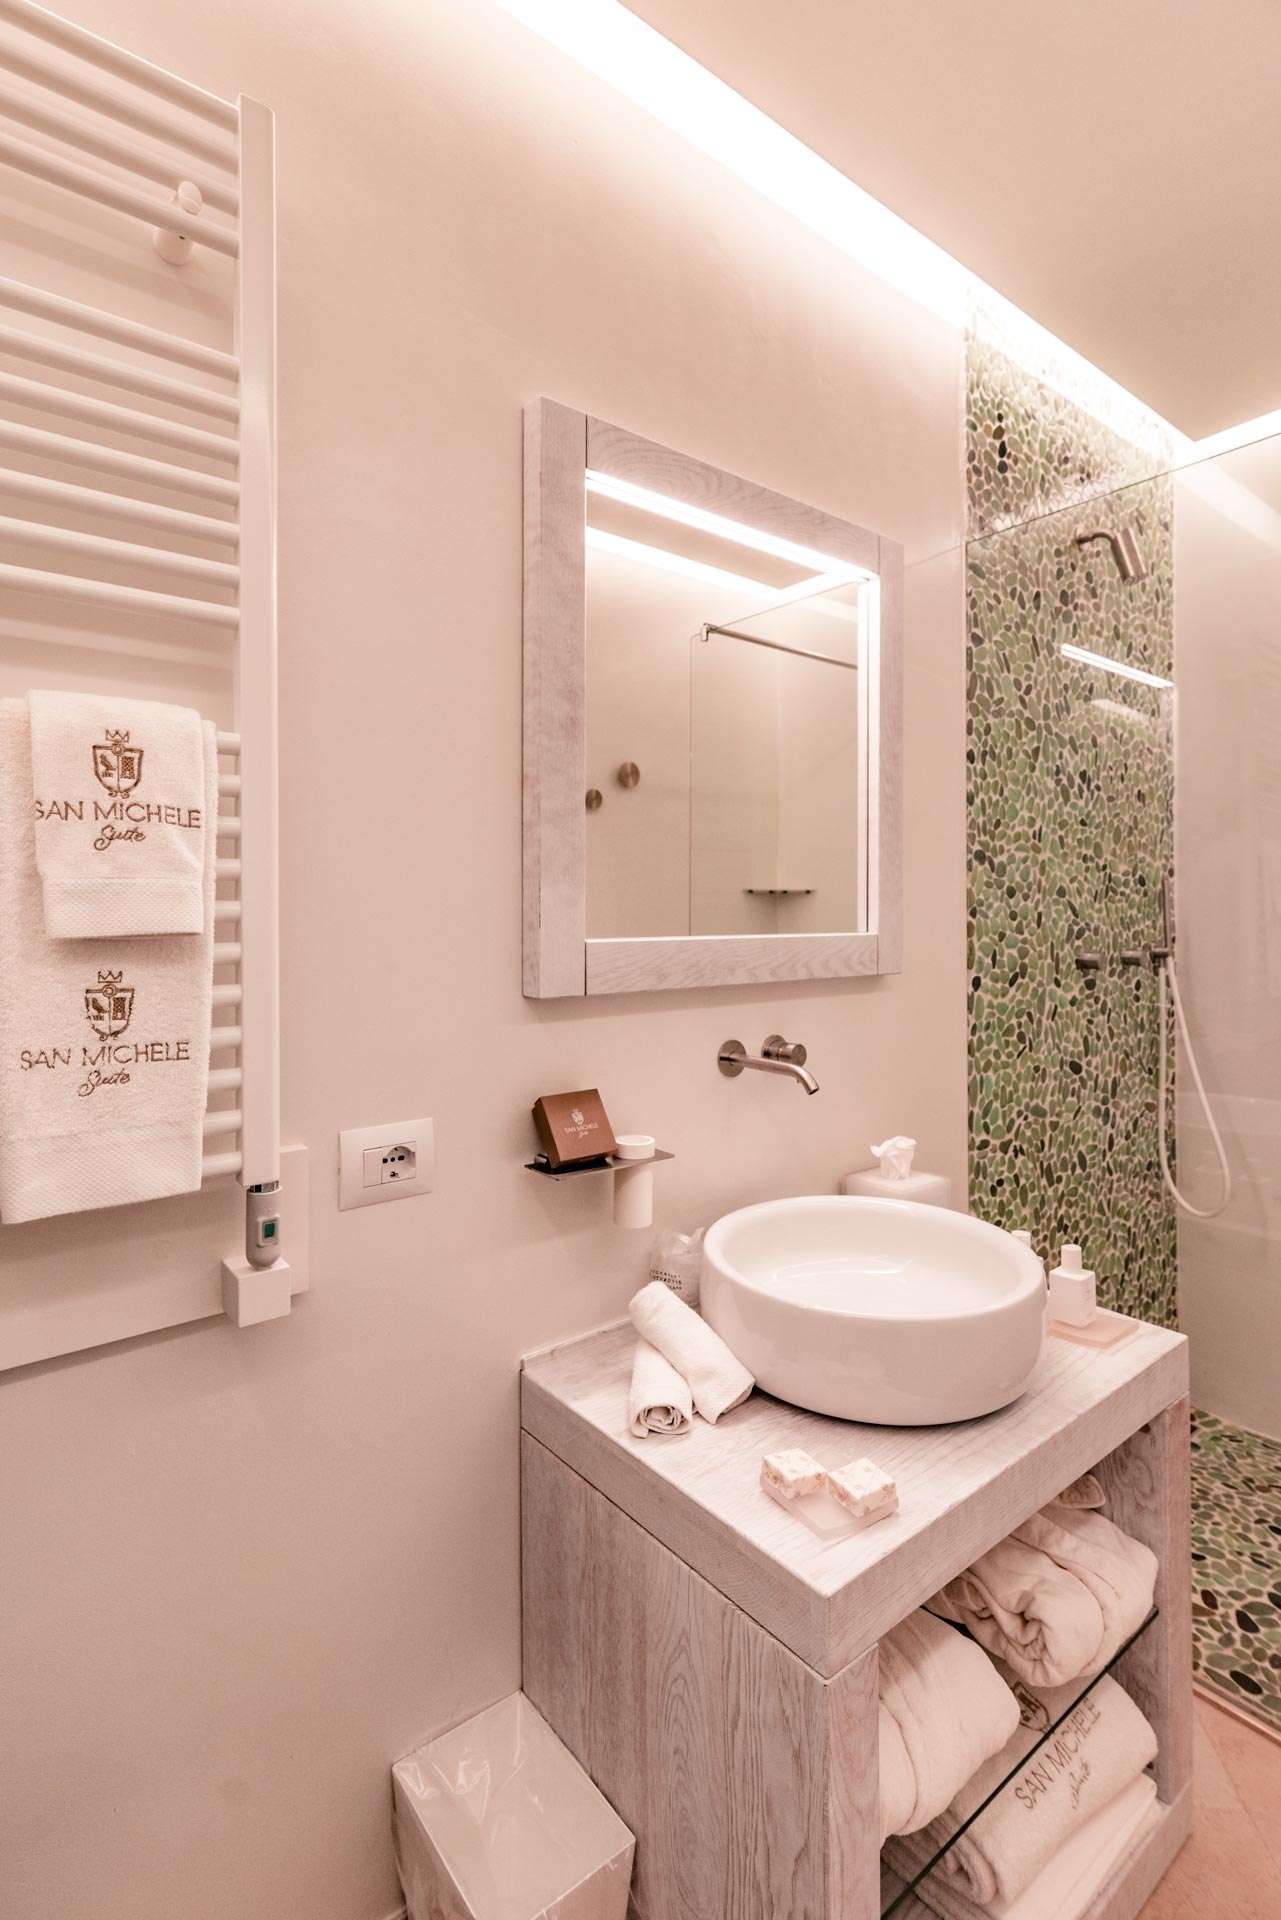 Bathroom in one of the luxury suites in Polignano a Mare at San Michele Suite